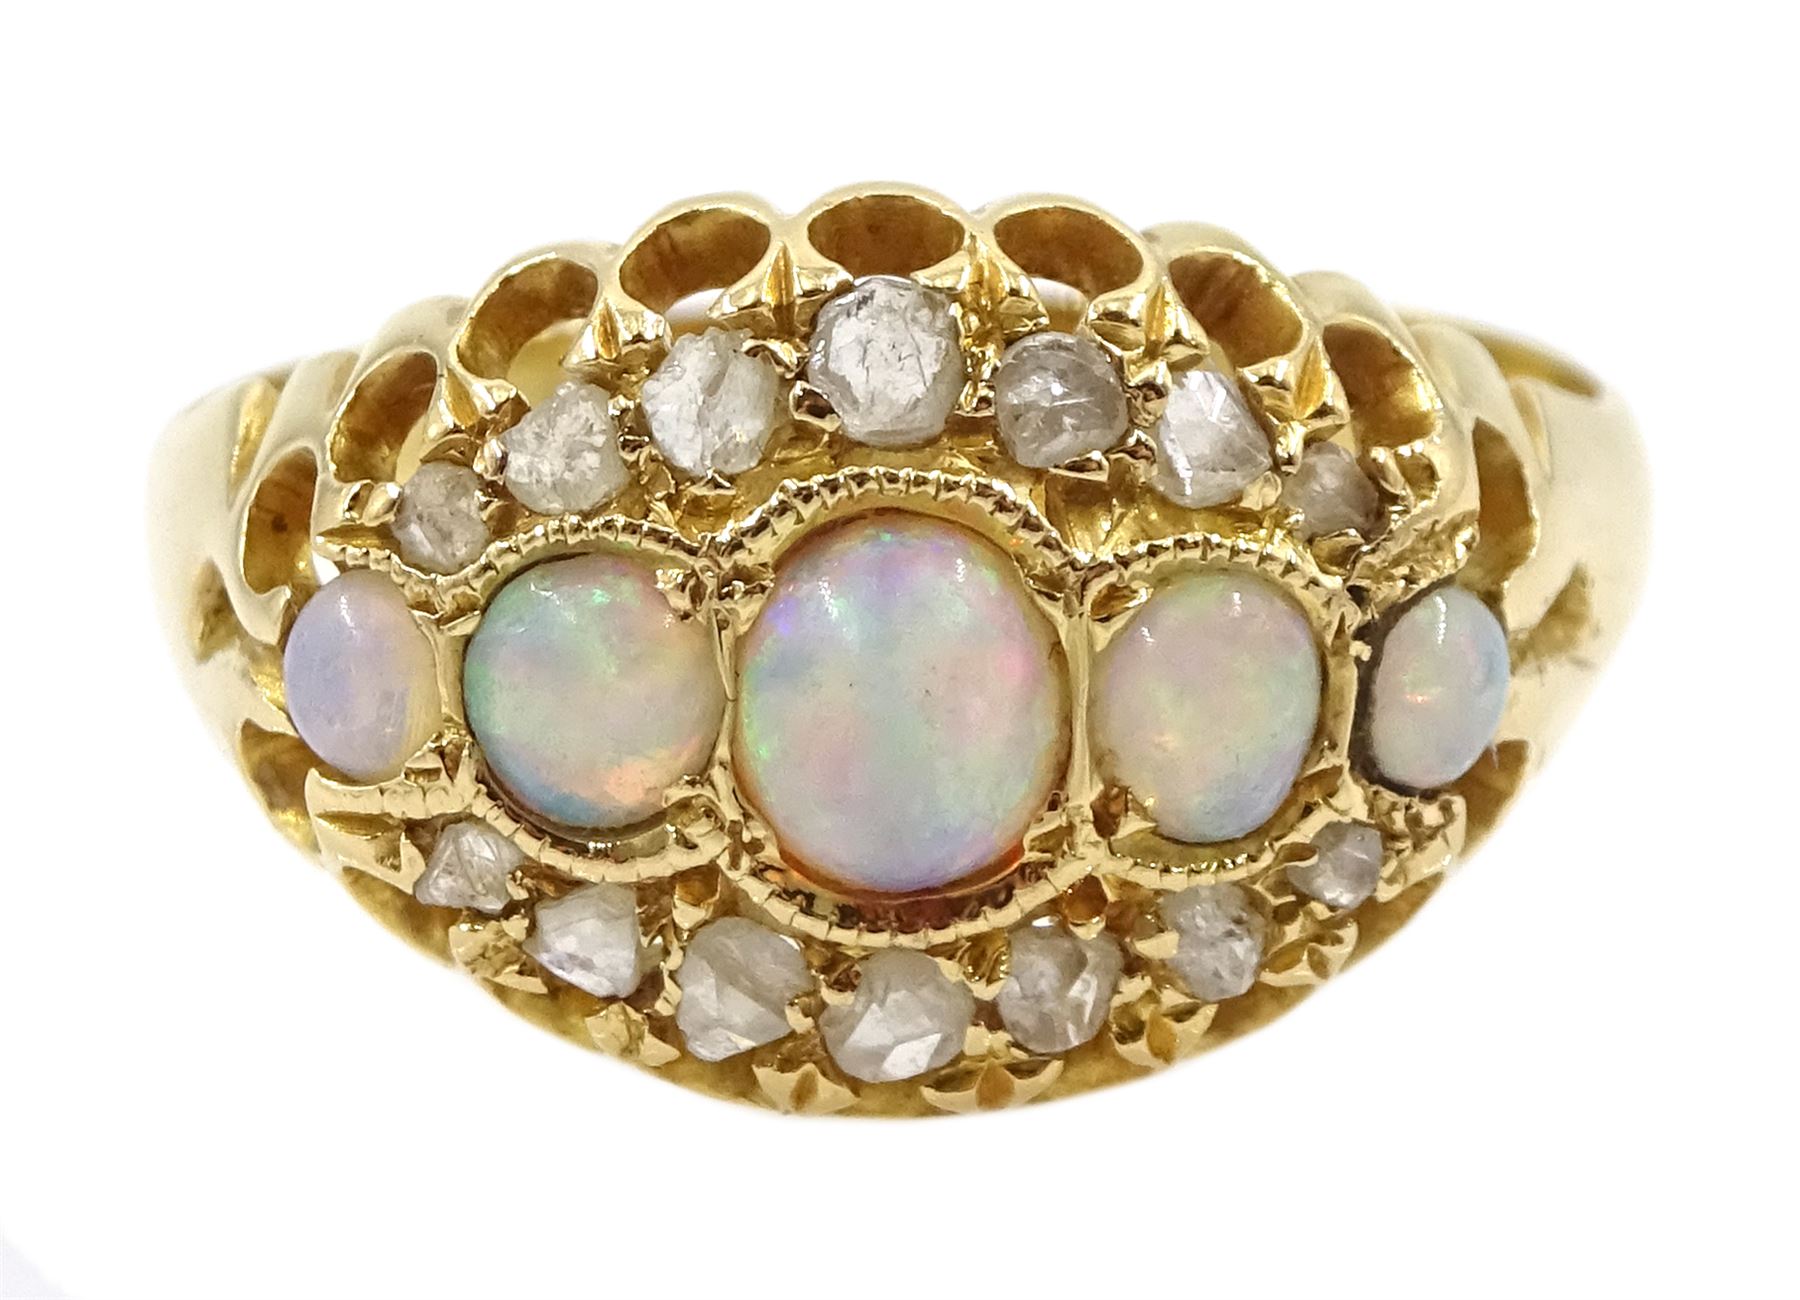 Early 20th century five stone graduating opal ring